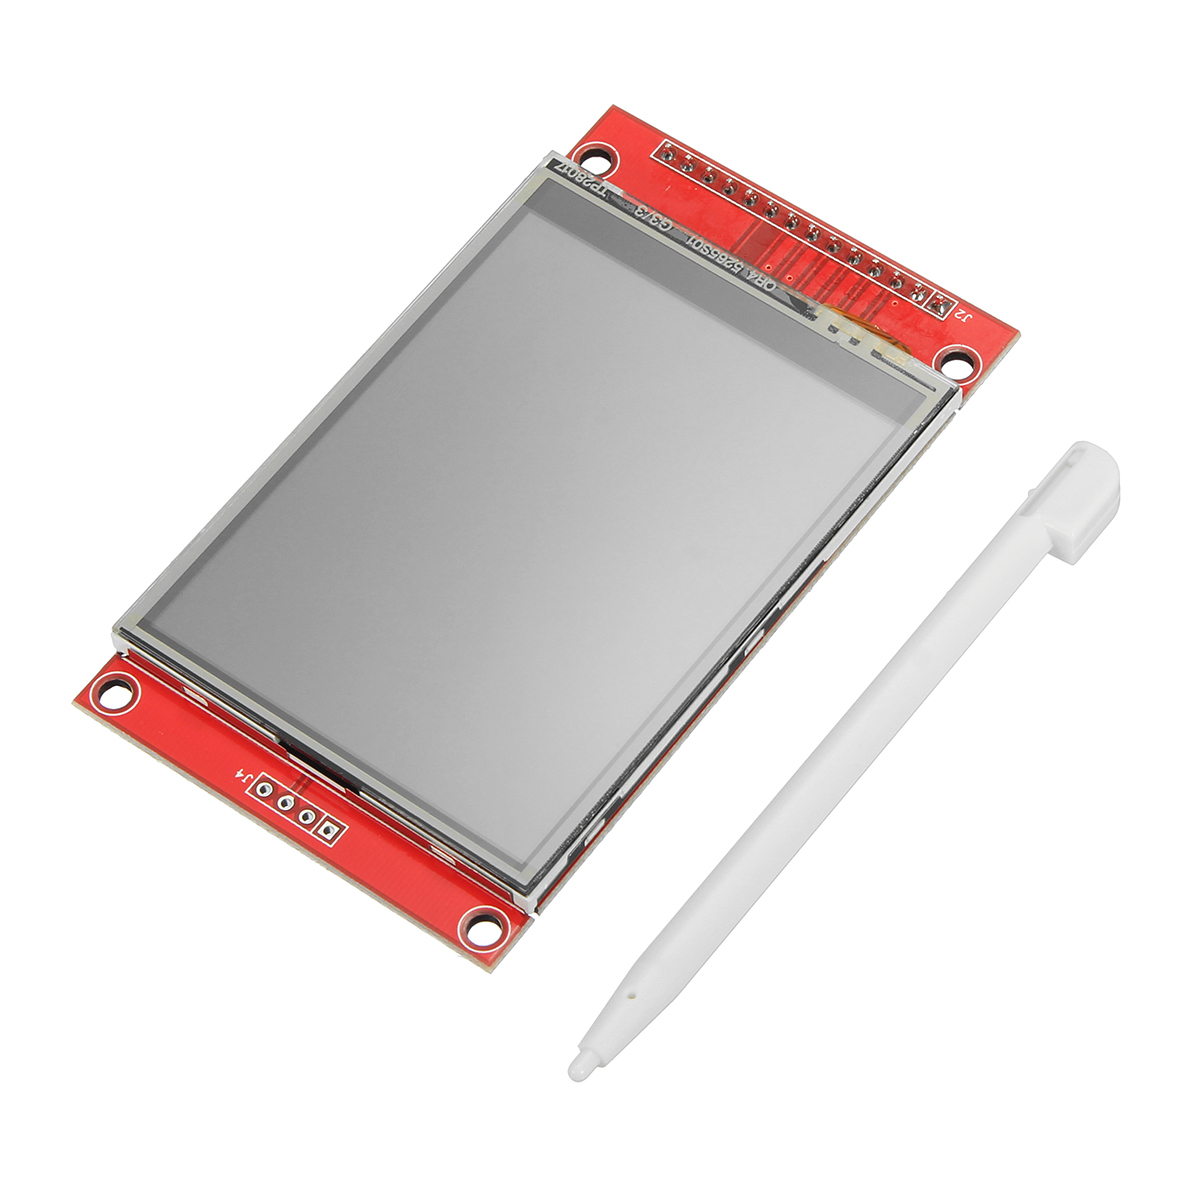 2.8 Inch ILI9341 240x320 SPI TFT LCD Display Touch Panel SPI Serial Port Module 1